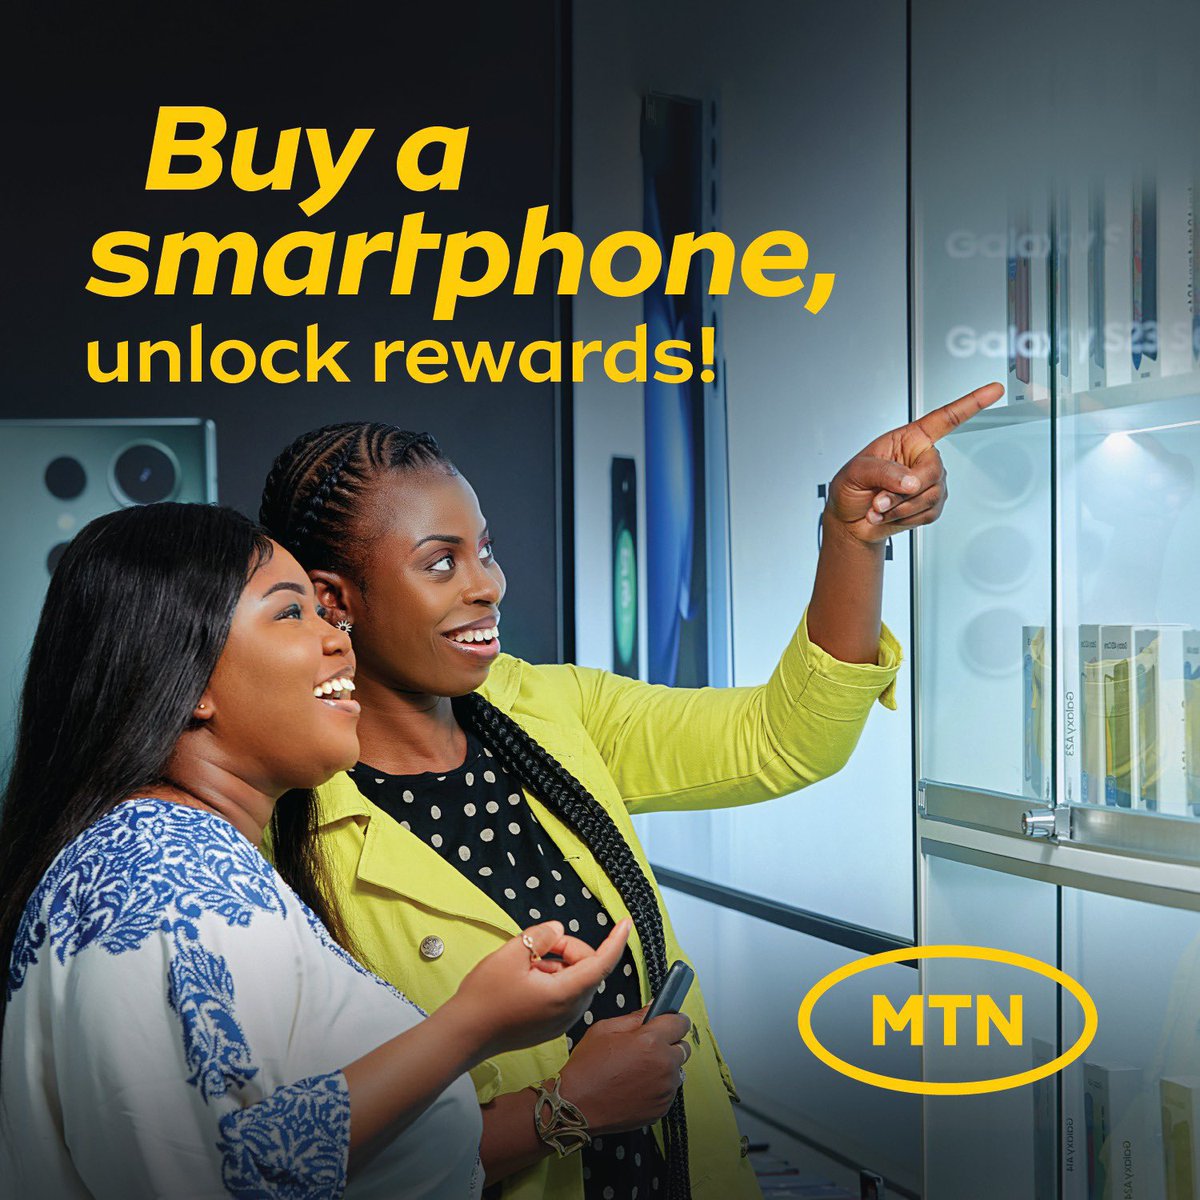 Did you know when you activate your MTN SIM on any new smartphone or tablet you automatically get 500MB Free? Spread the word! TnCs apply #MTNDevices